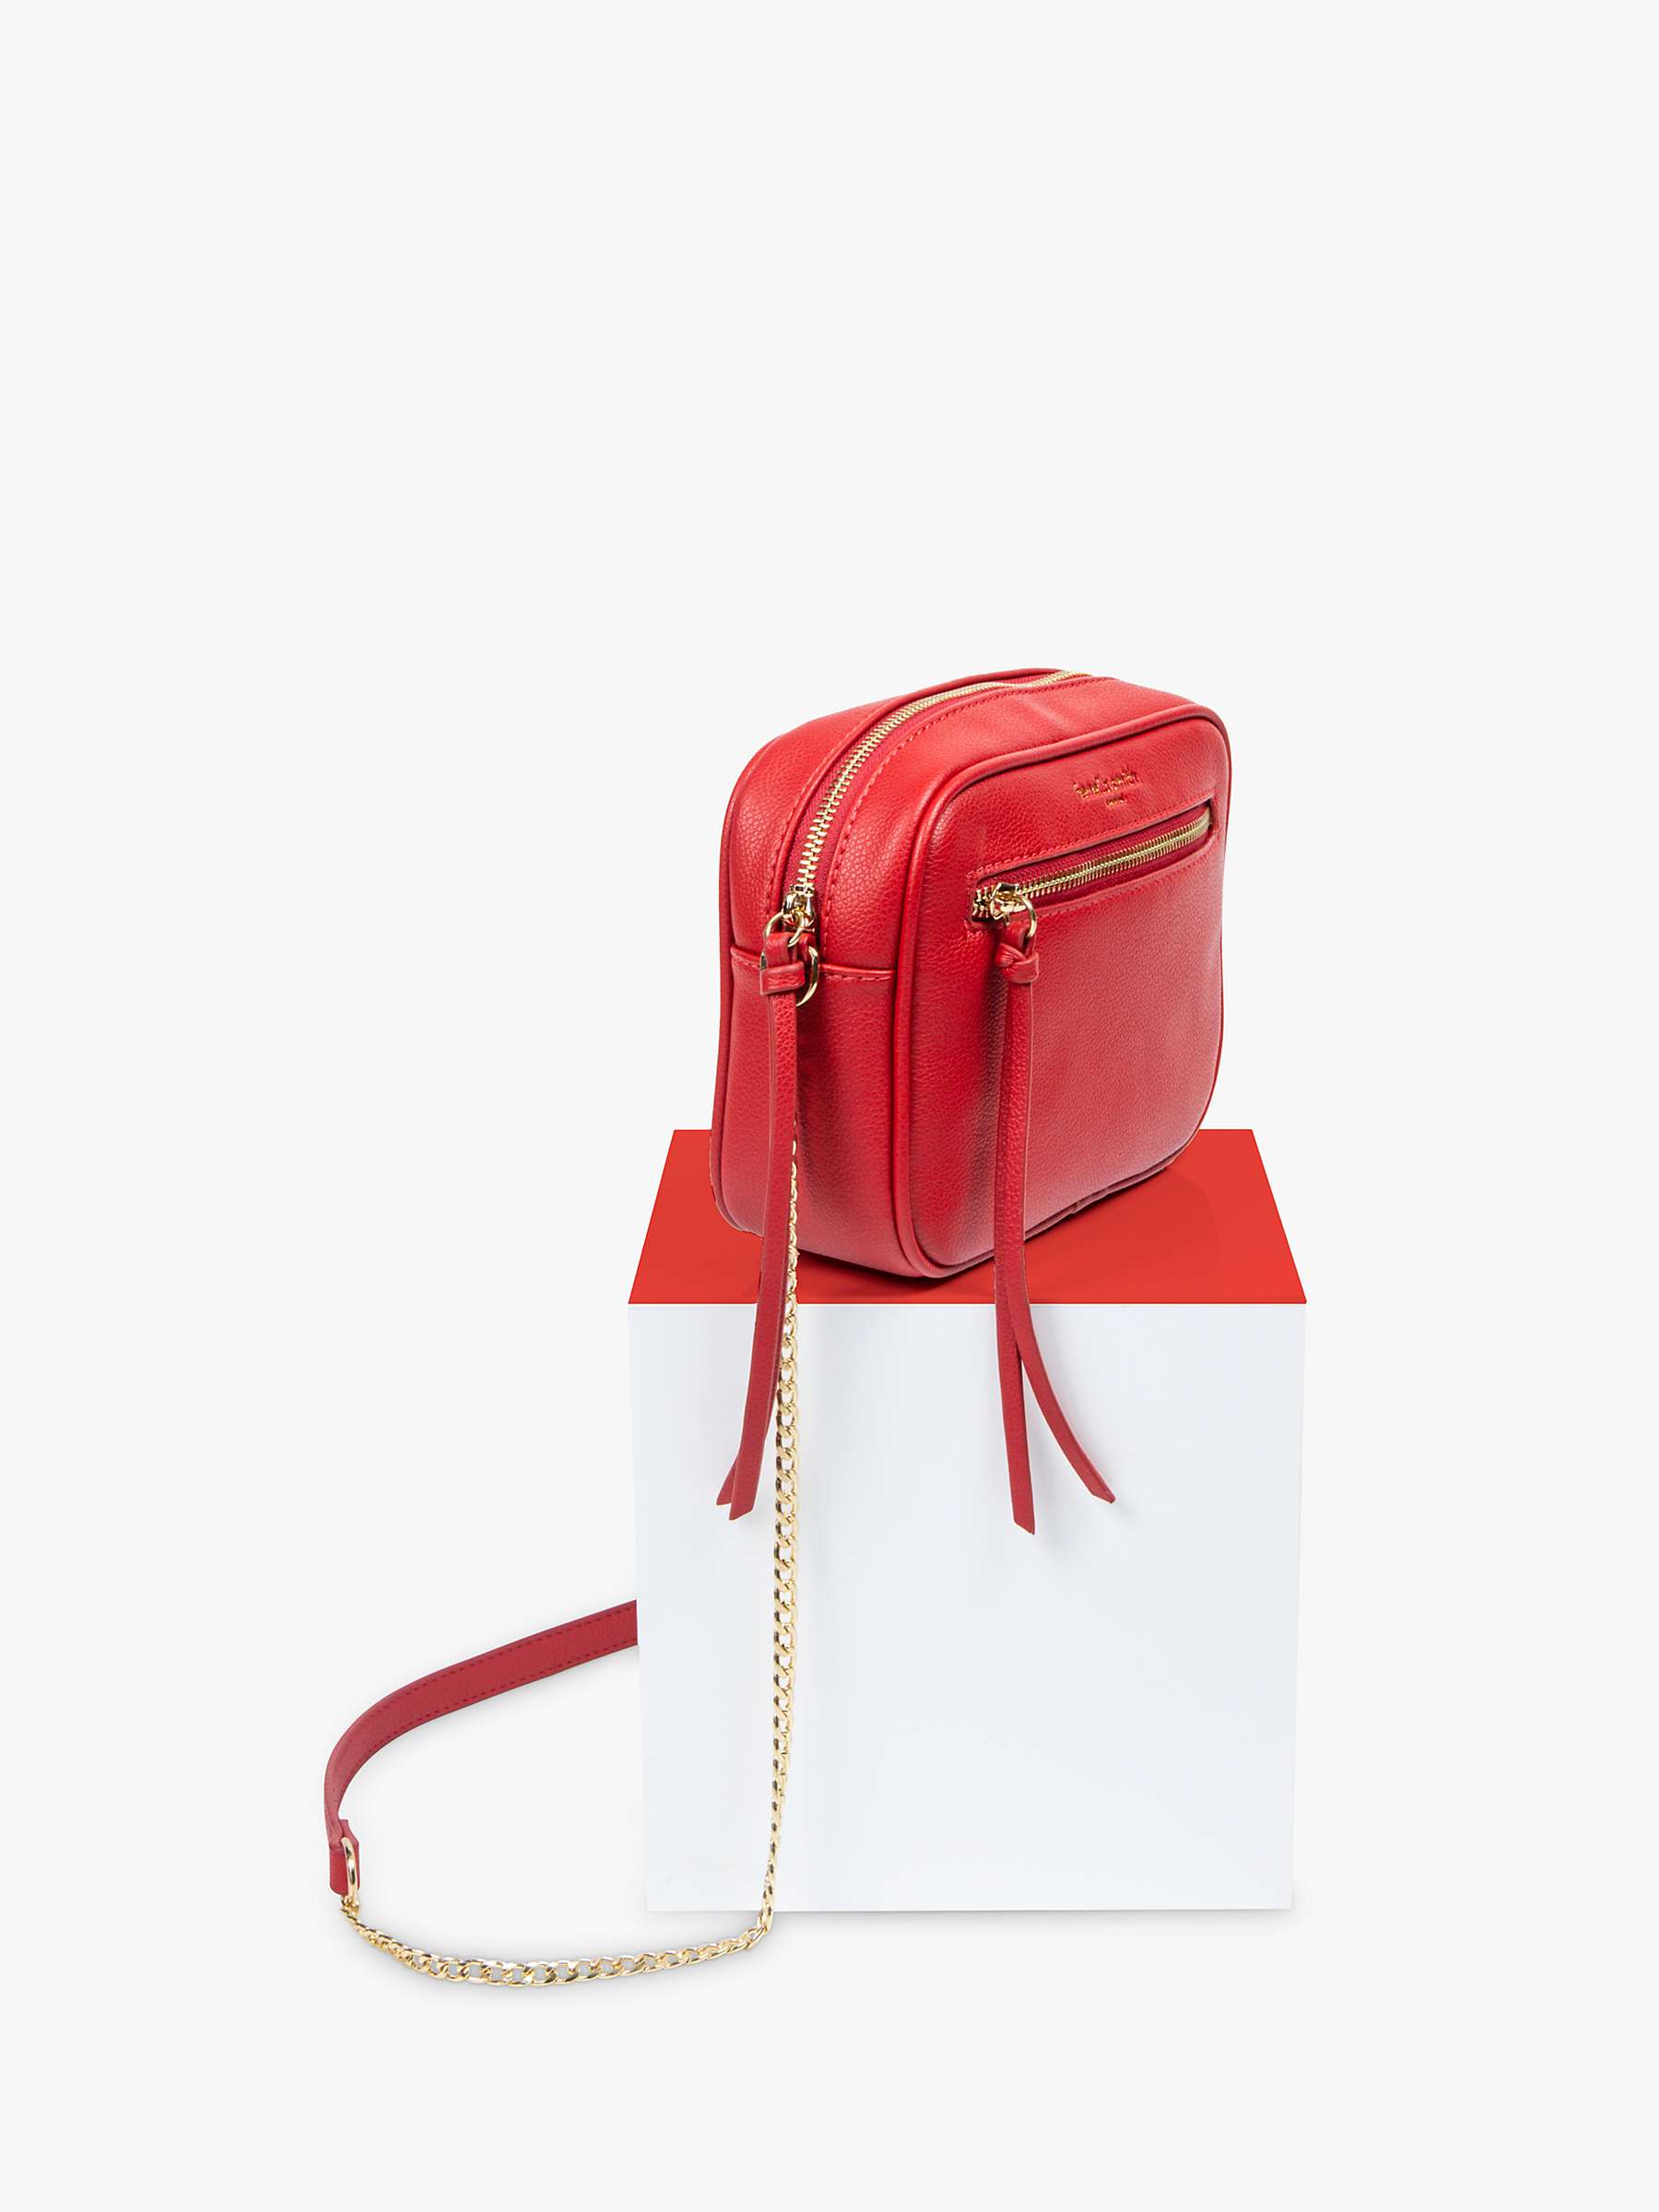 Fenella Smith Bag & Purse Gift Set, Red/Navy at John Lewis & Partners